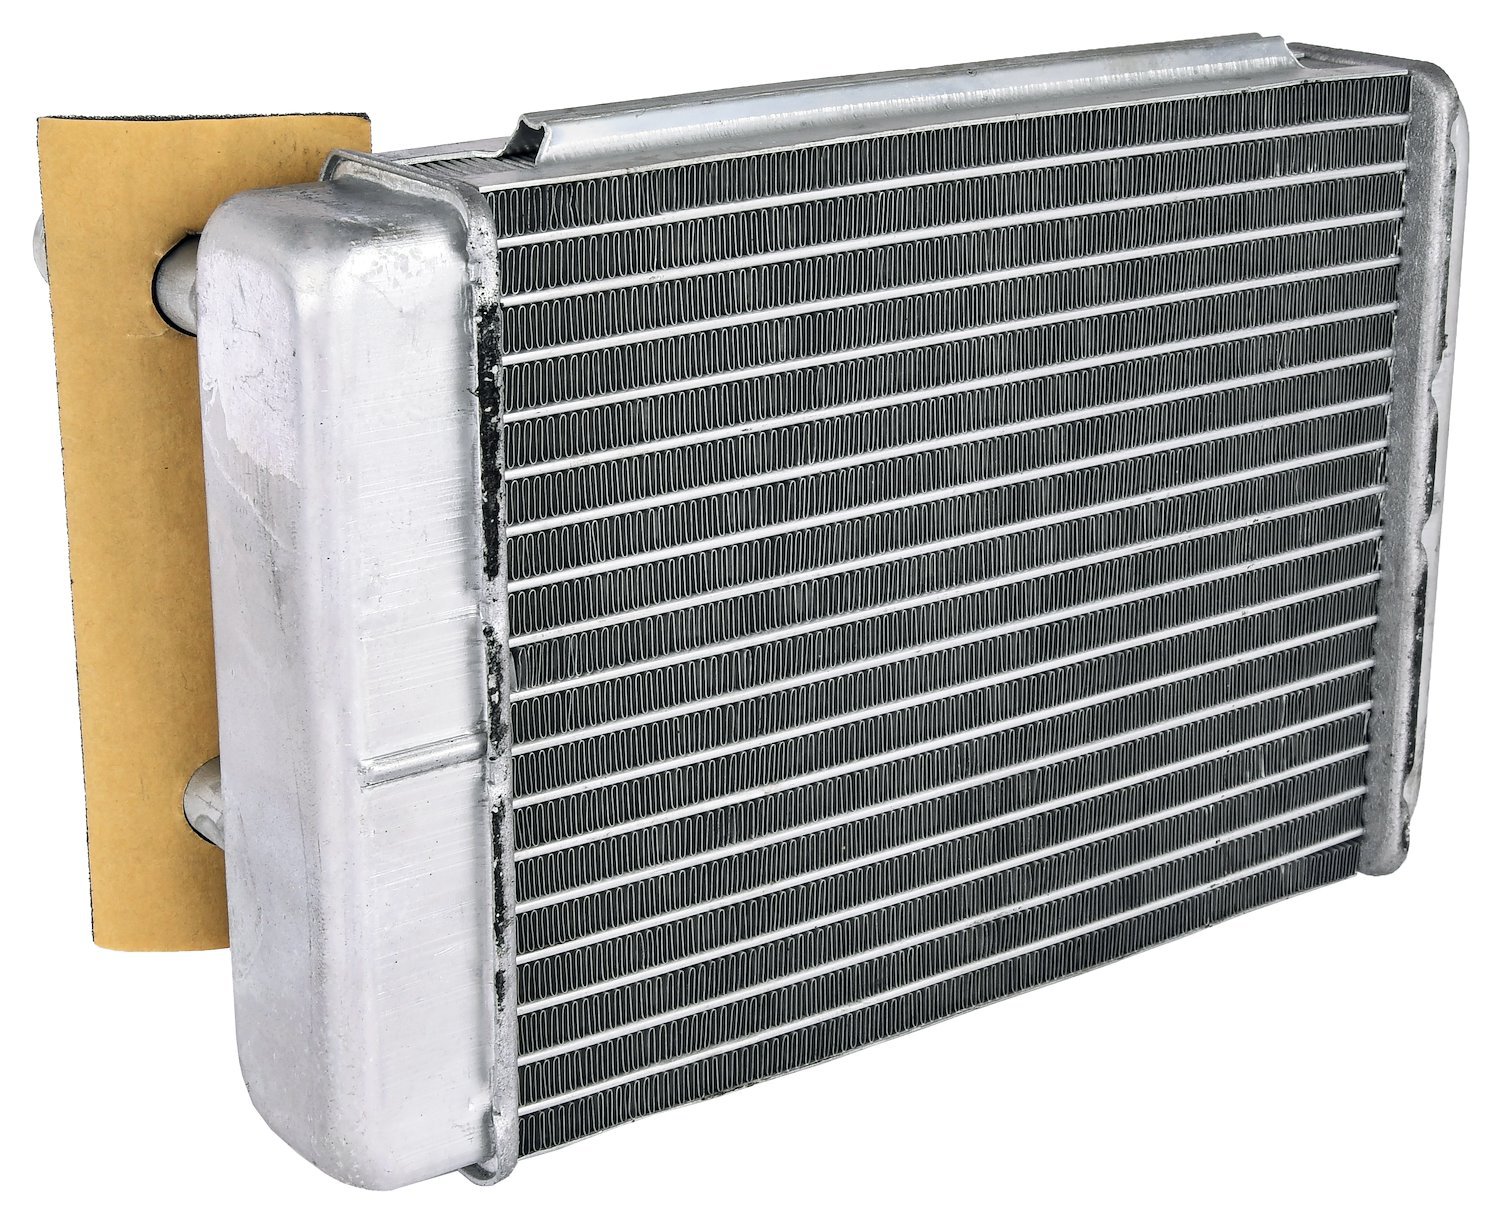 Heater Core Fits Select 1973-1996 GM Full-Size Truck, Blazer, Jimmy, Suburban and Van Models Without A/C